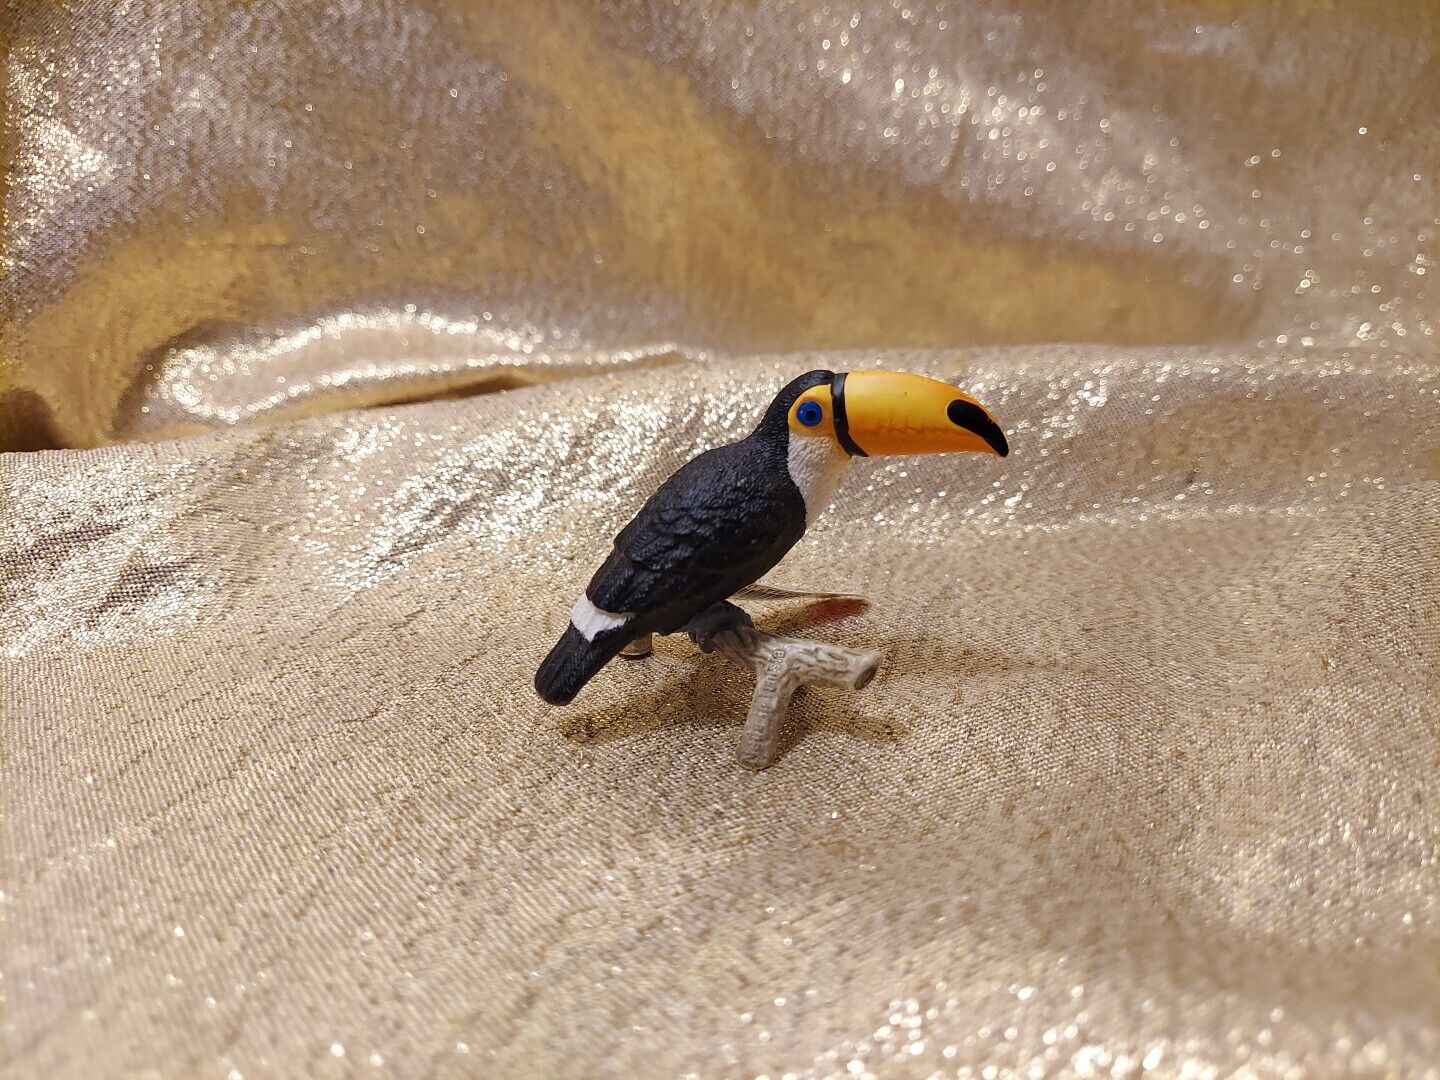 Schleich TOUCAN Animal Bird 14777 Figure 2016 New With Tags Black White Yellow